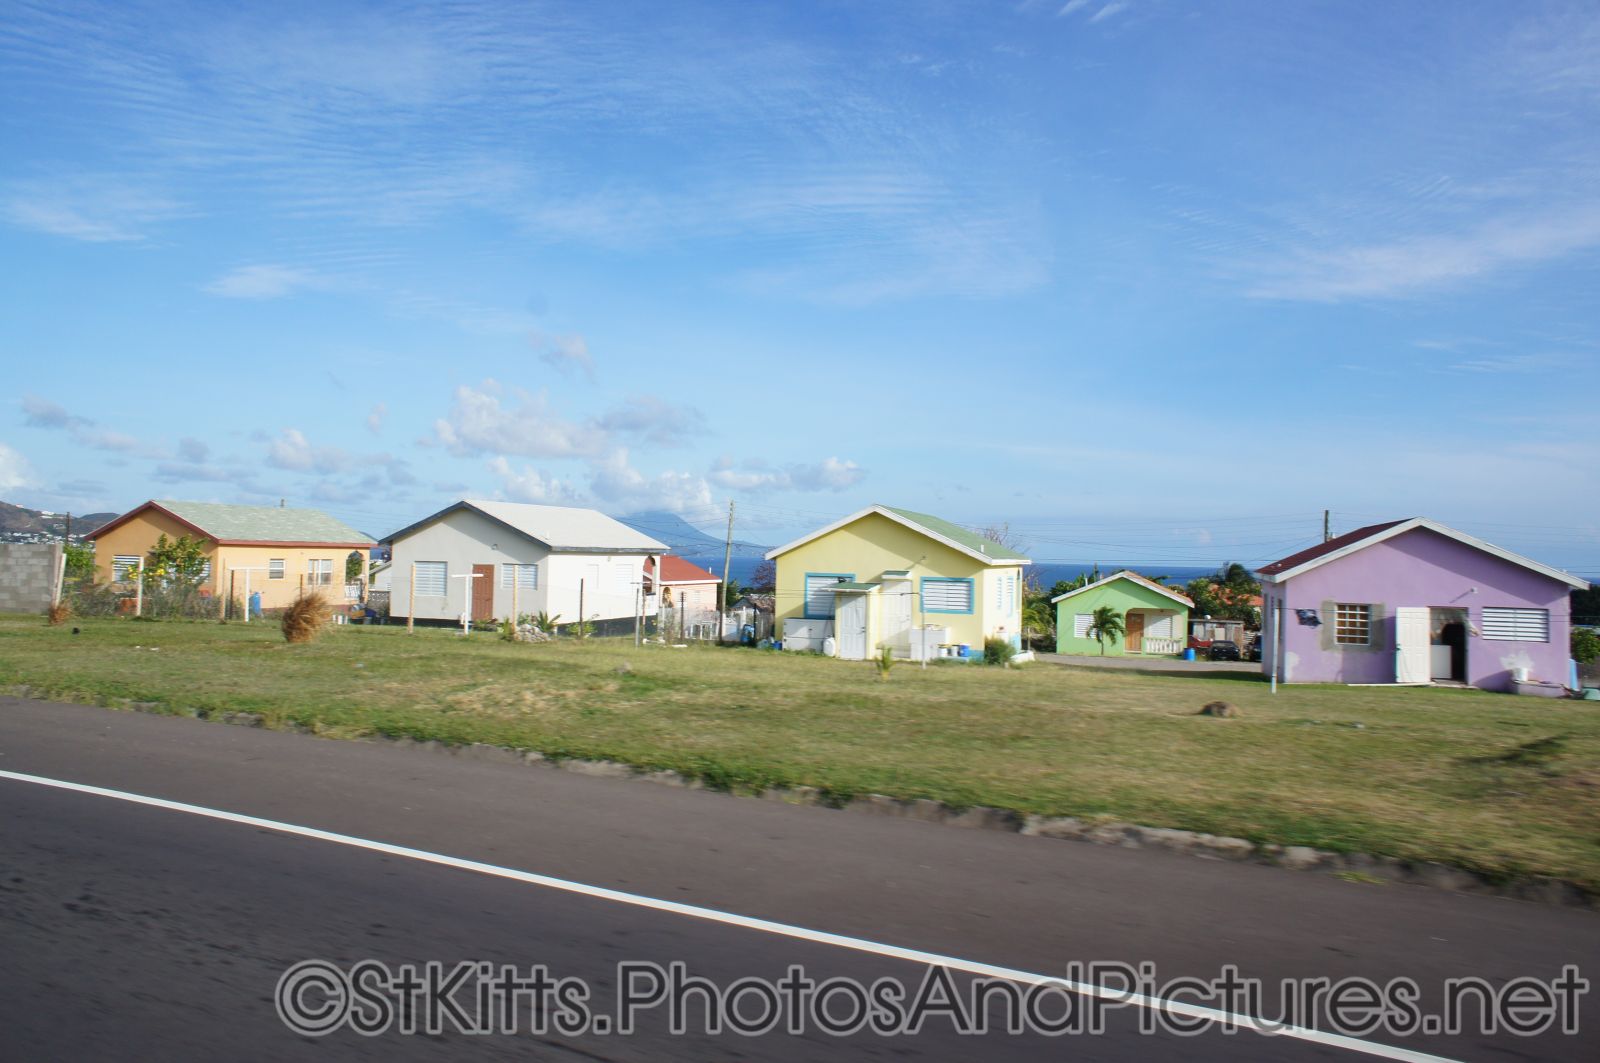 Several homes with colorful paint in St Kitts.jpg
